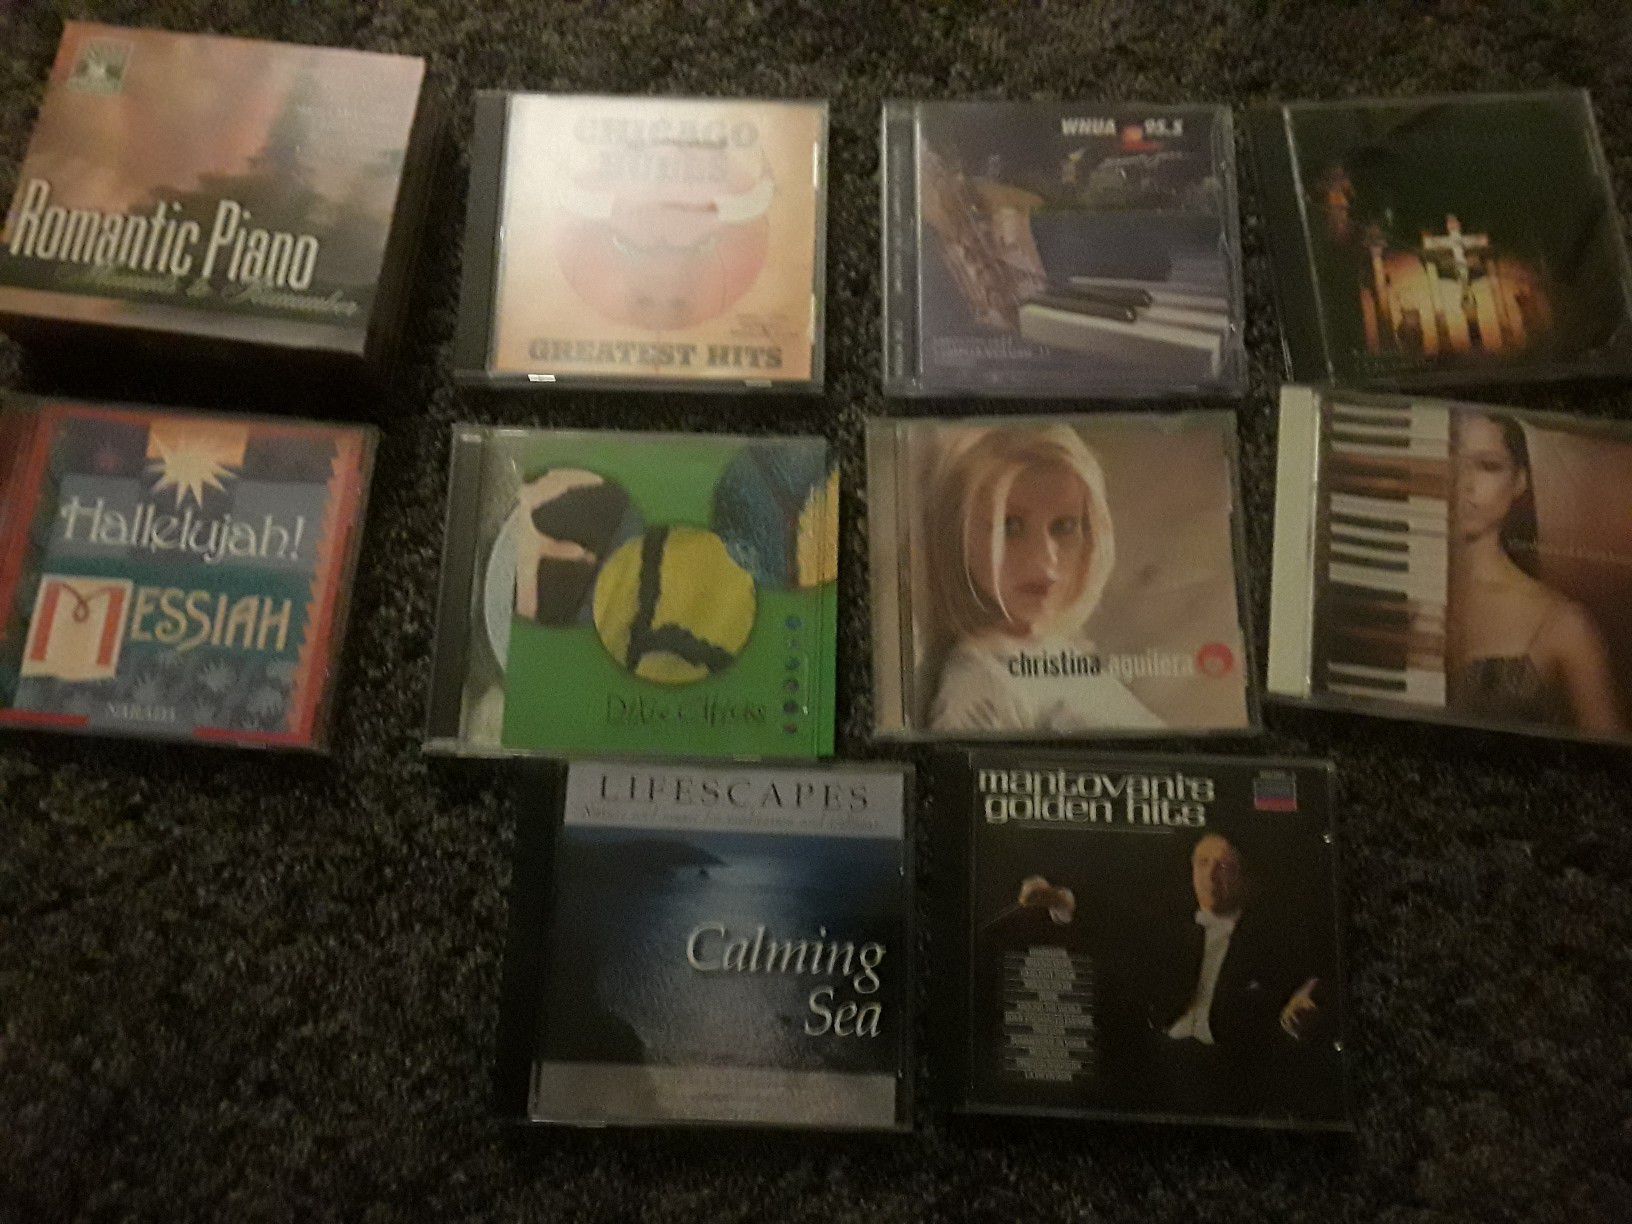 10 CD's including the Dixie Chicks, Chicago Bulls Greatest Hits, Alicia Keys, Christmas music, calming see...